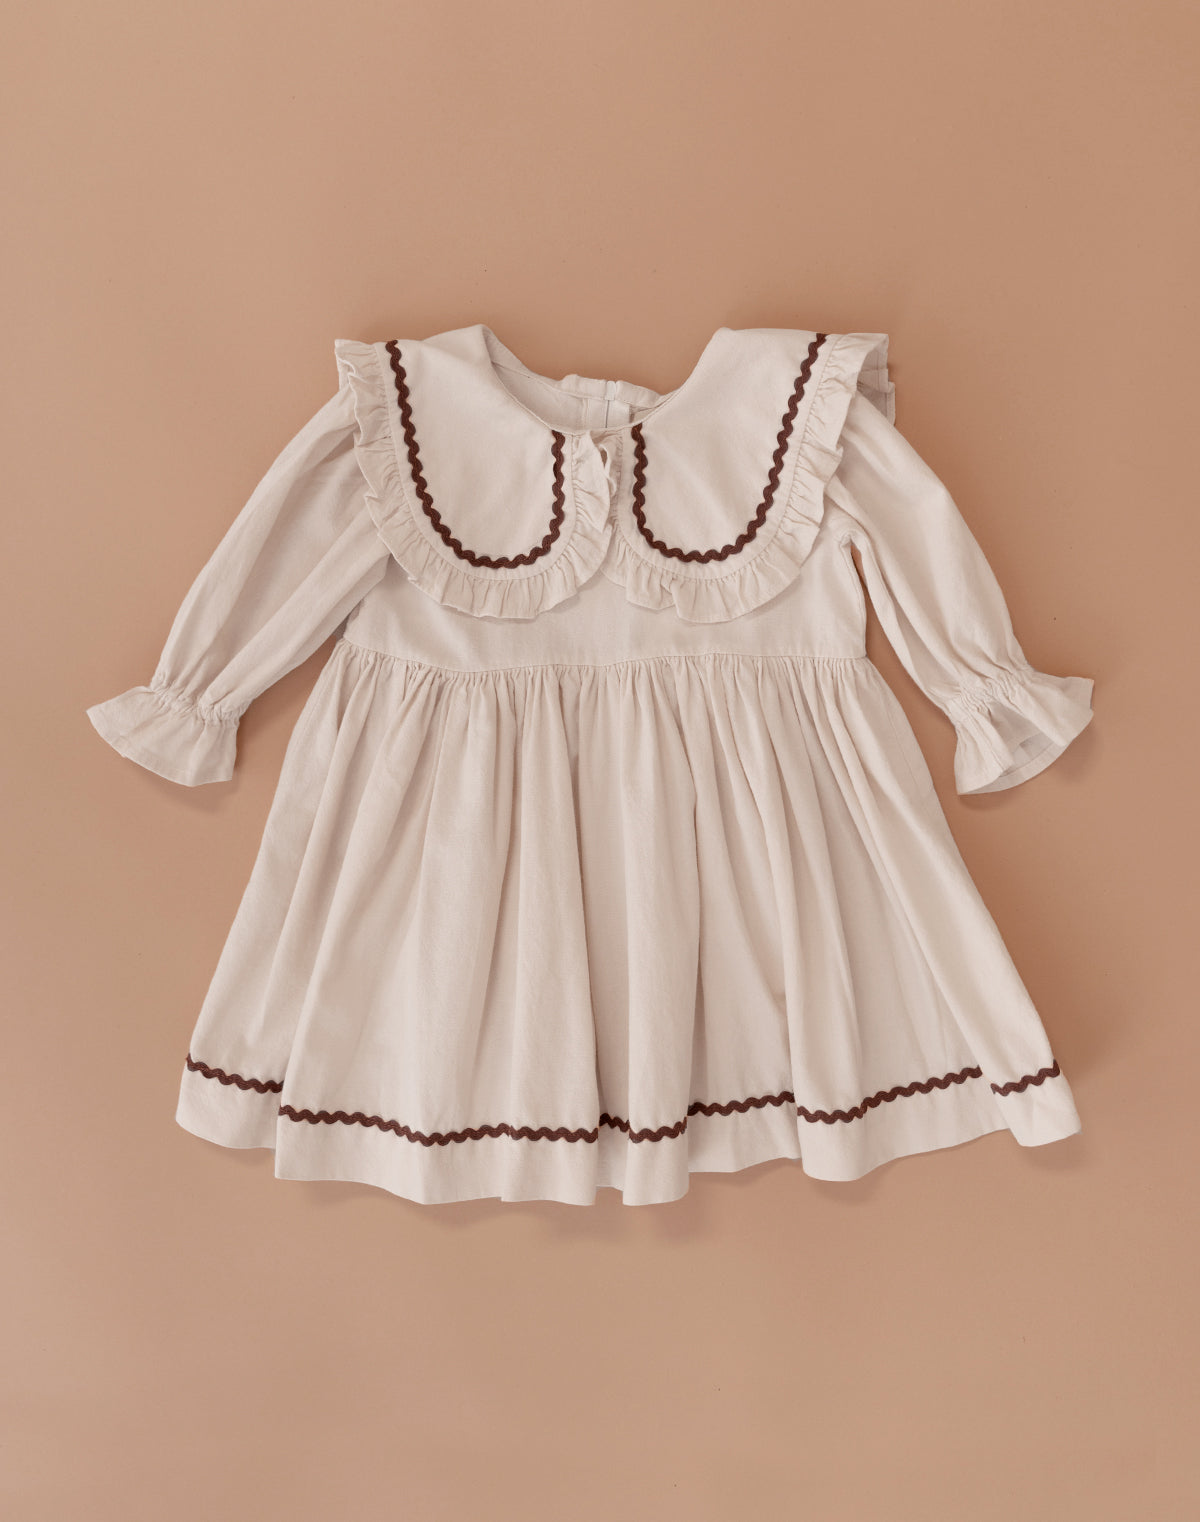 Image of Noble Organic Cindy Lou Dress in Oat Milk